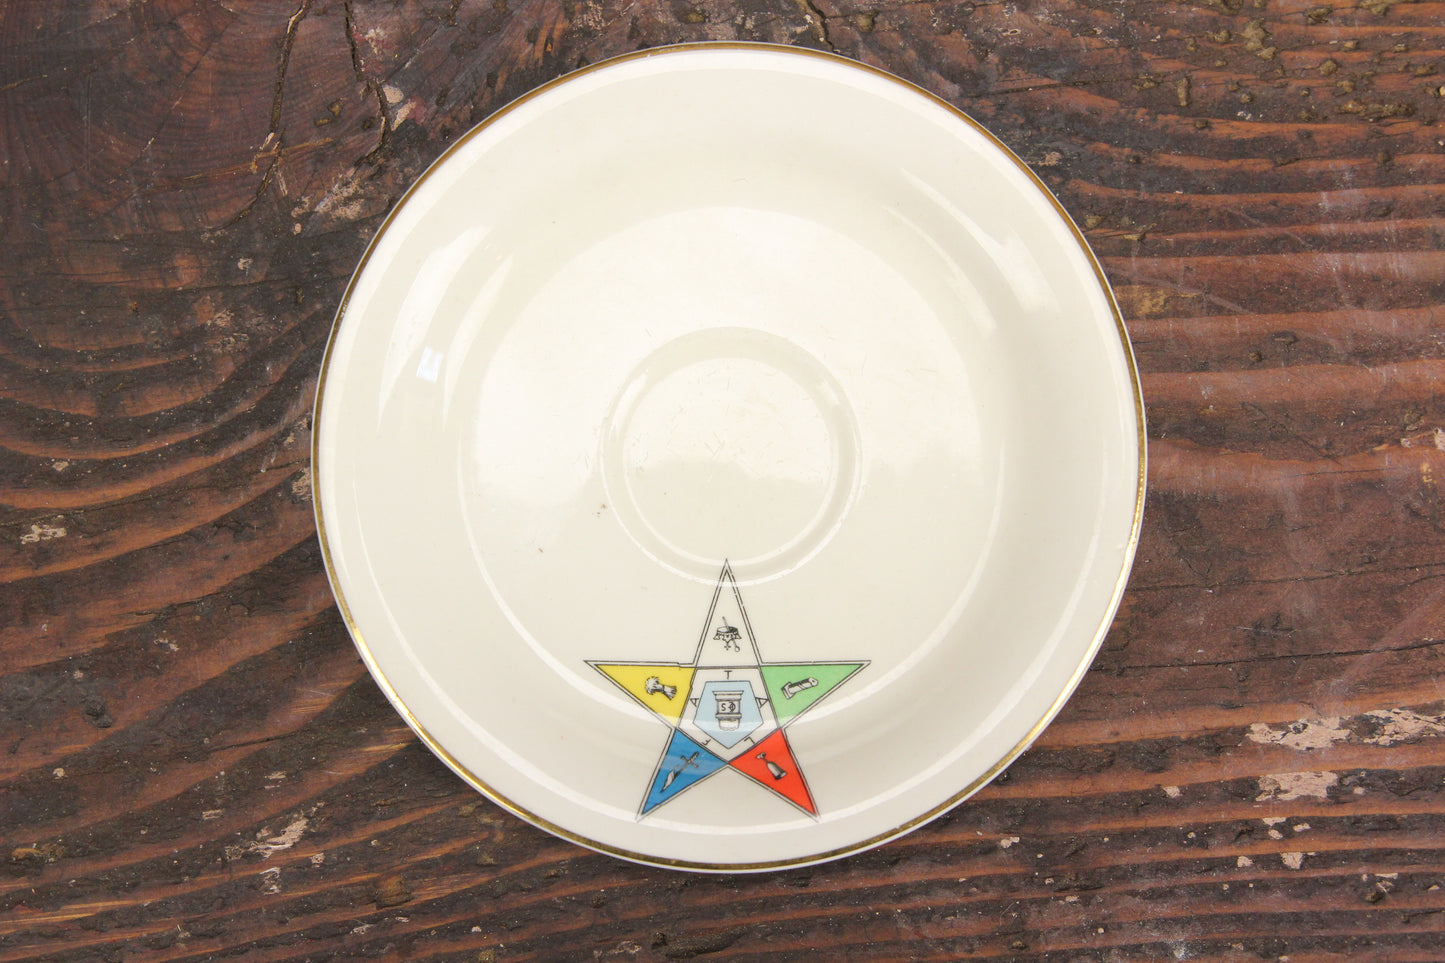 Freemason Order of the Eastern Star Eggshell Cup and Saucer by Homer Laughlin, USA D46N5